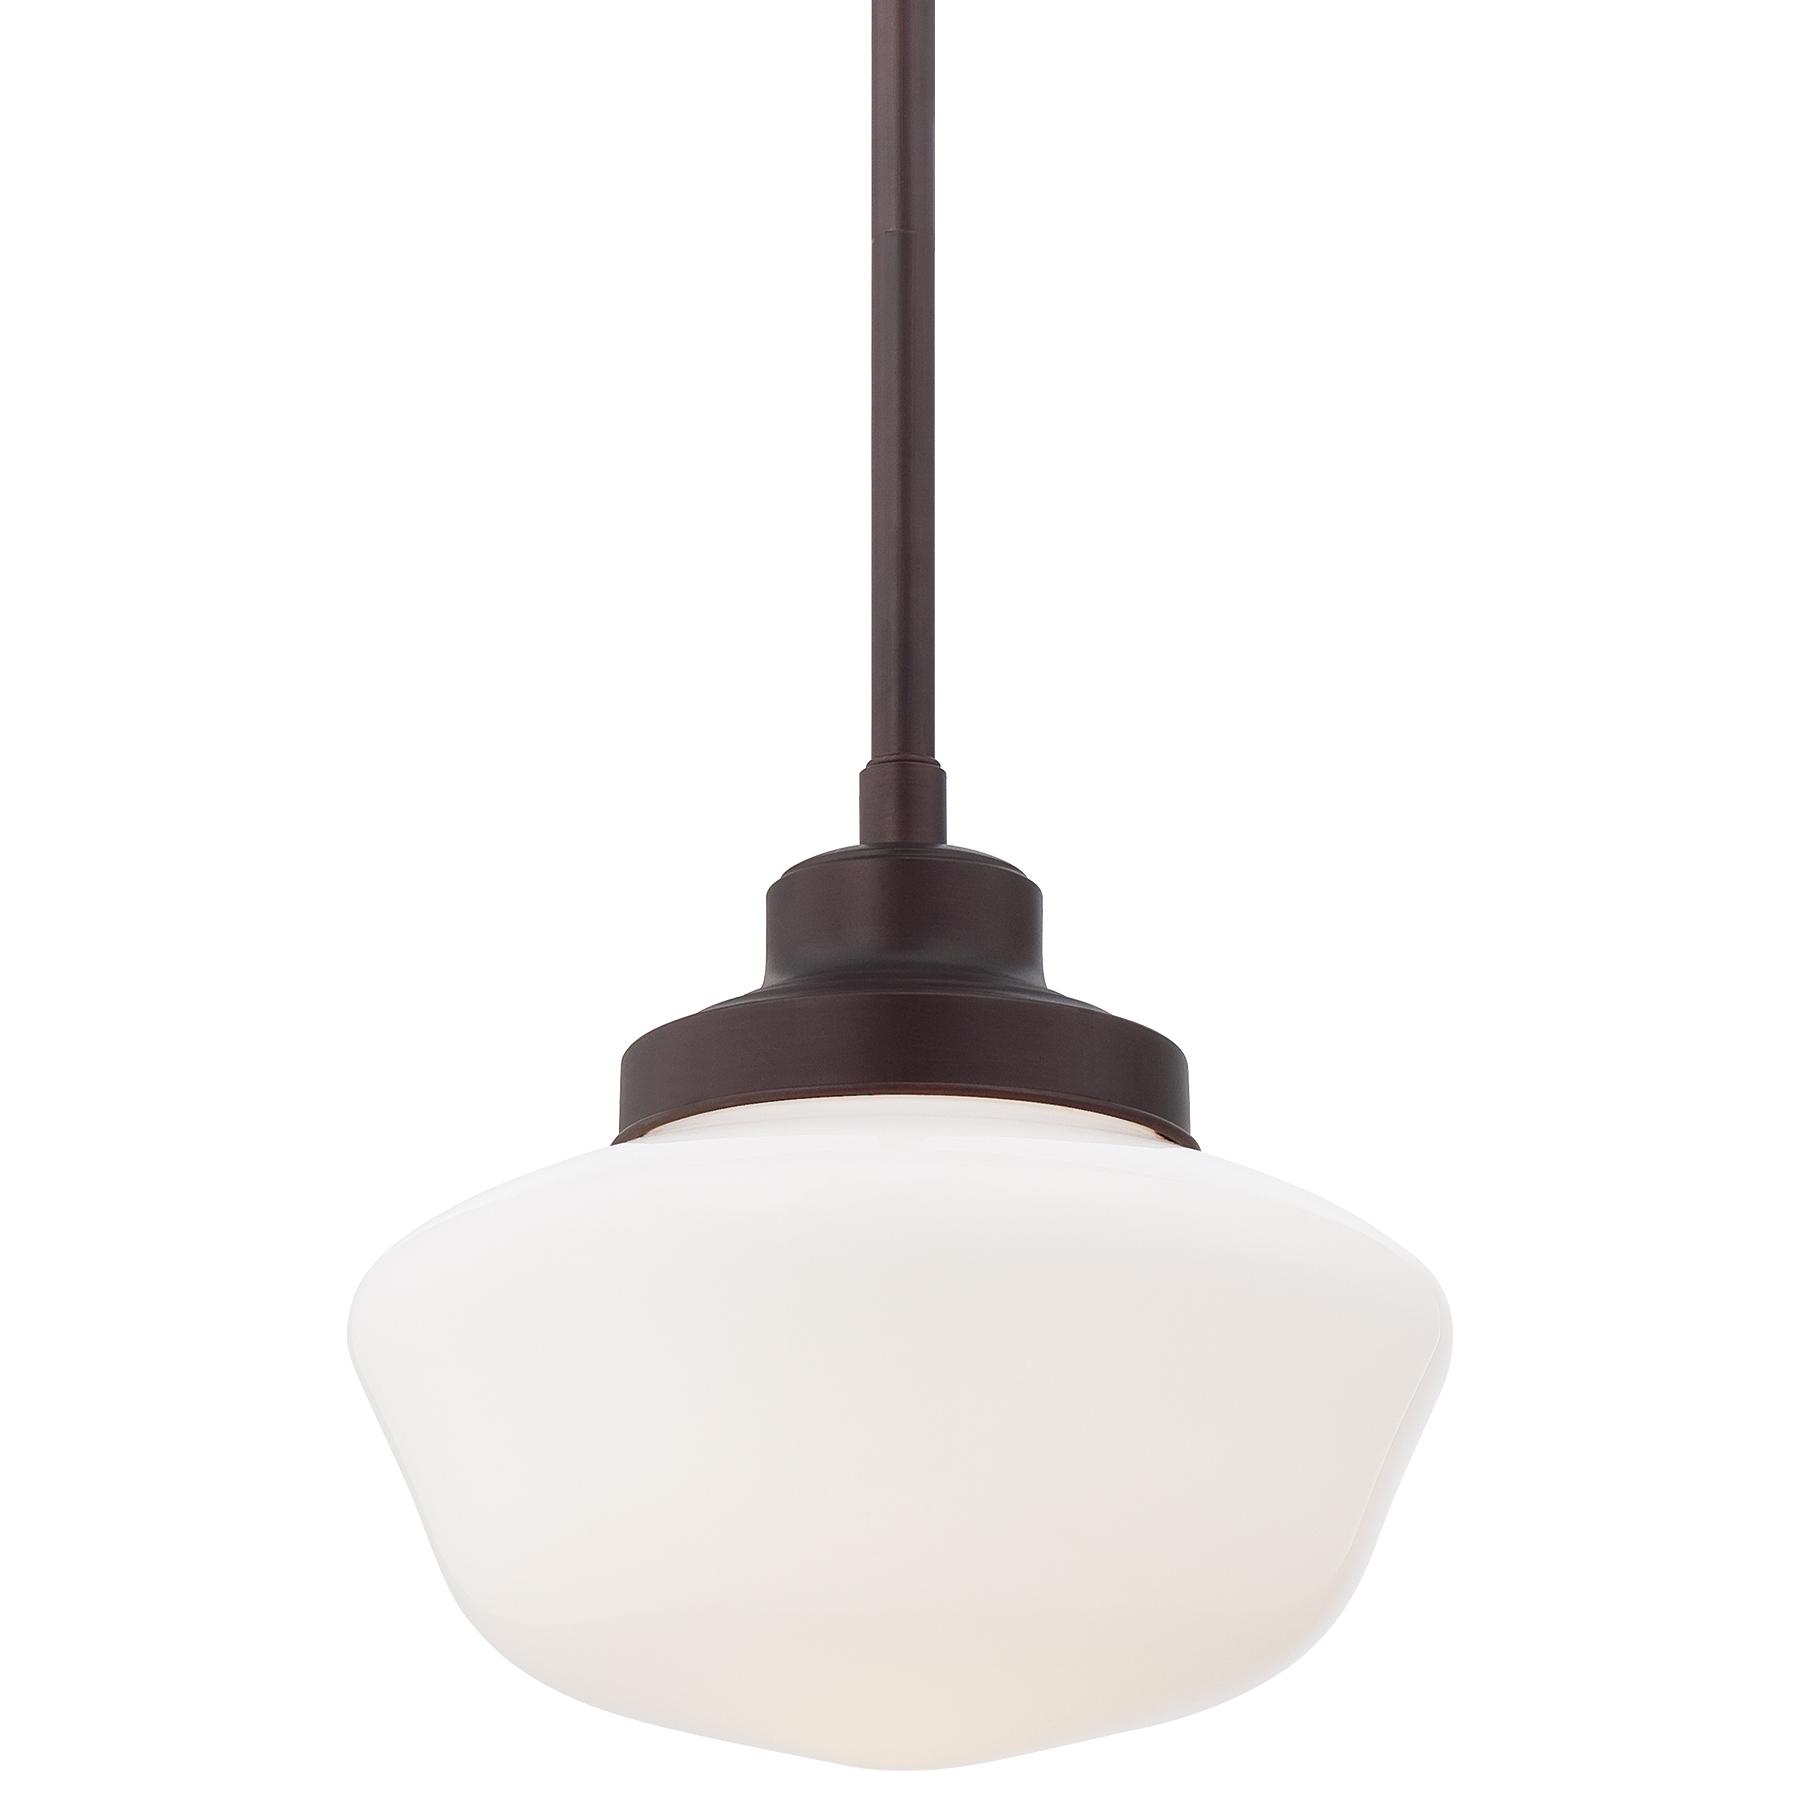 Minka Lavery-2254-576-1 Light Pendant in Traditional Style - 10.75 inches tall by 12 inches wide   Brushed Bronze Finish with Opal Glass